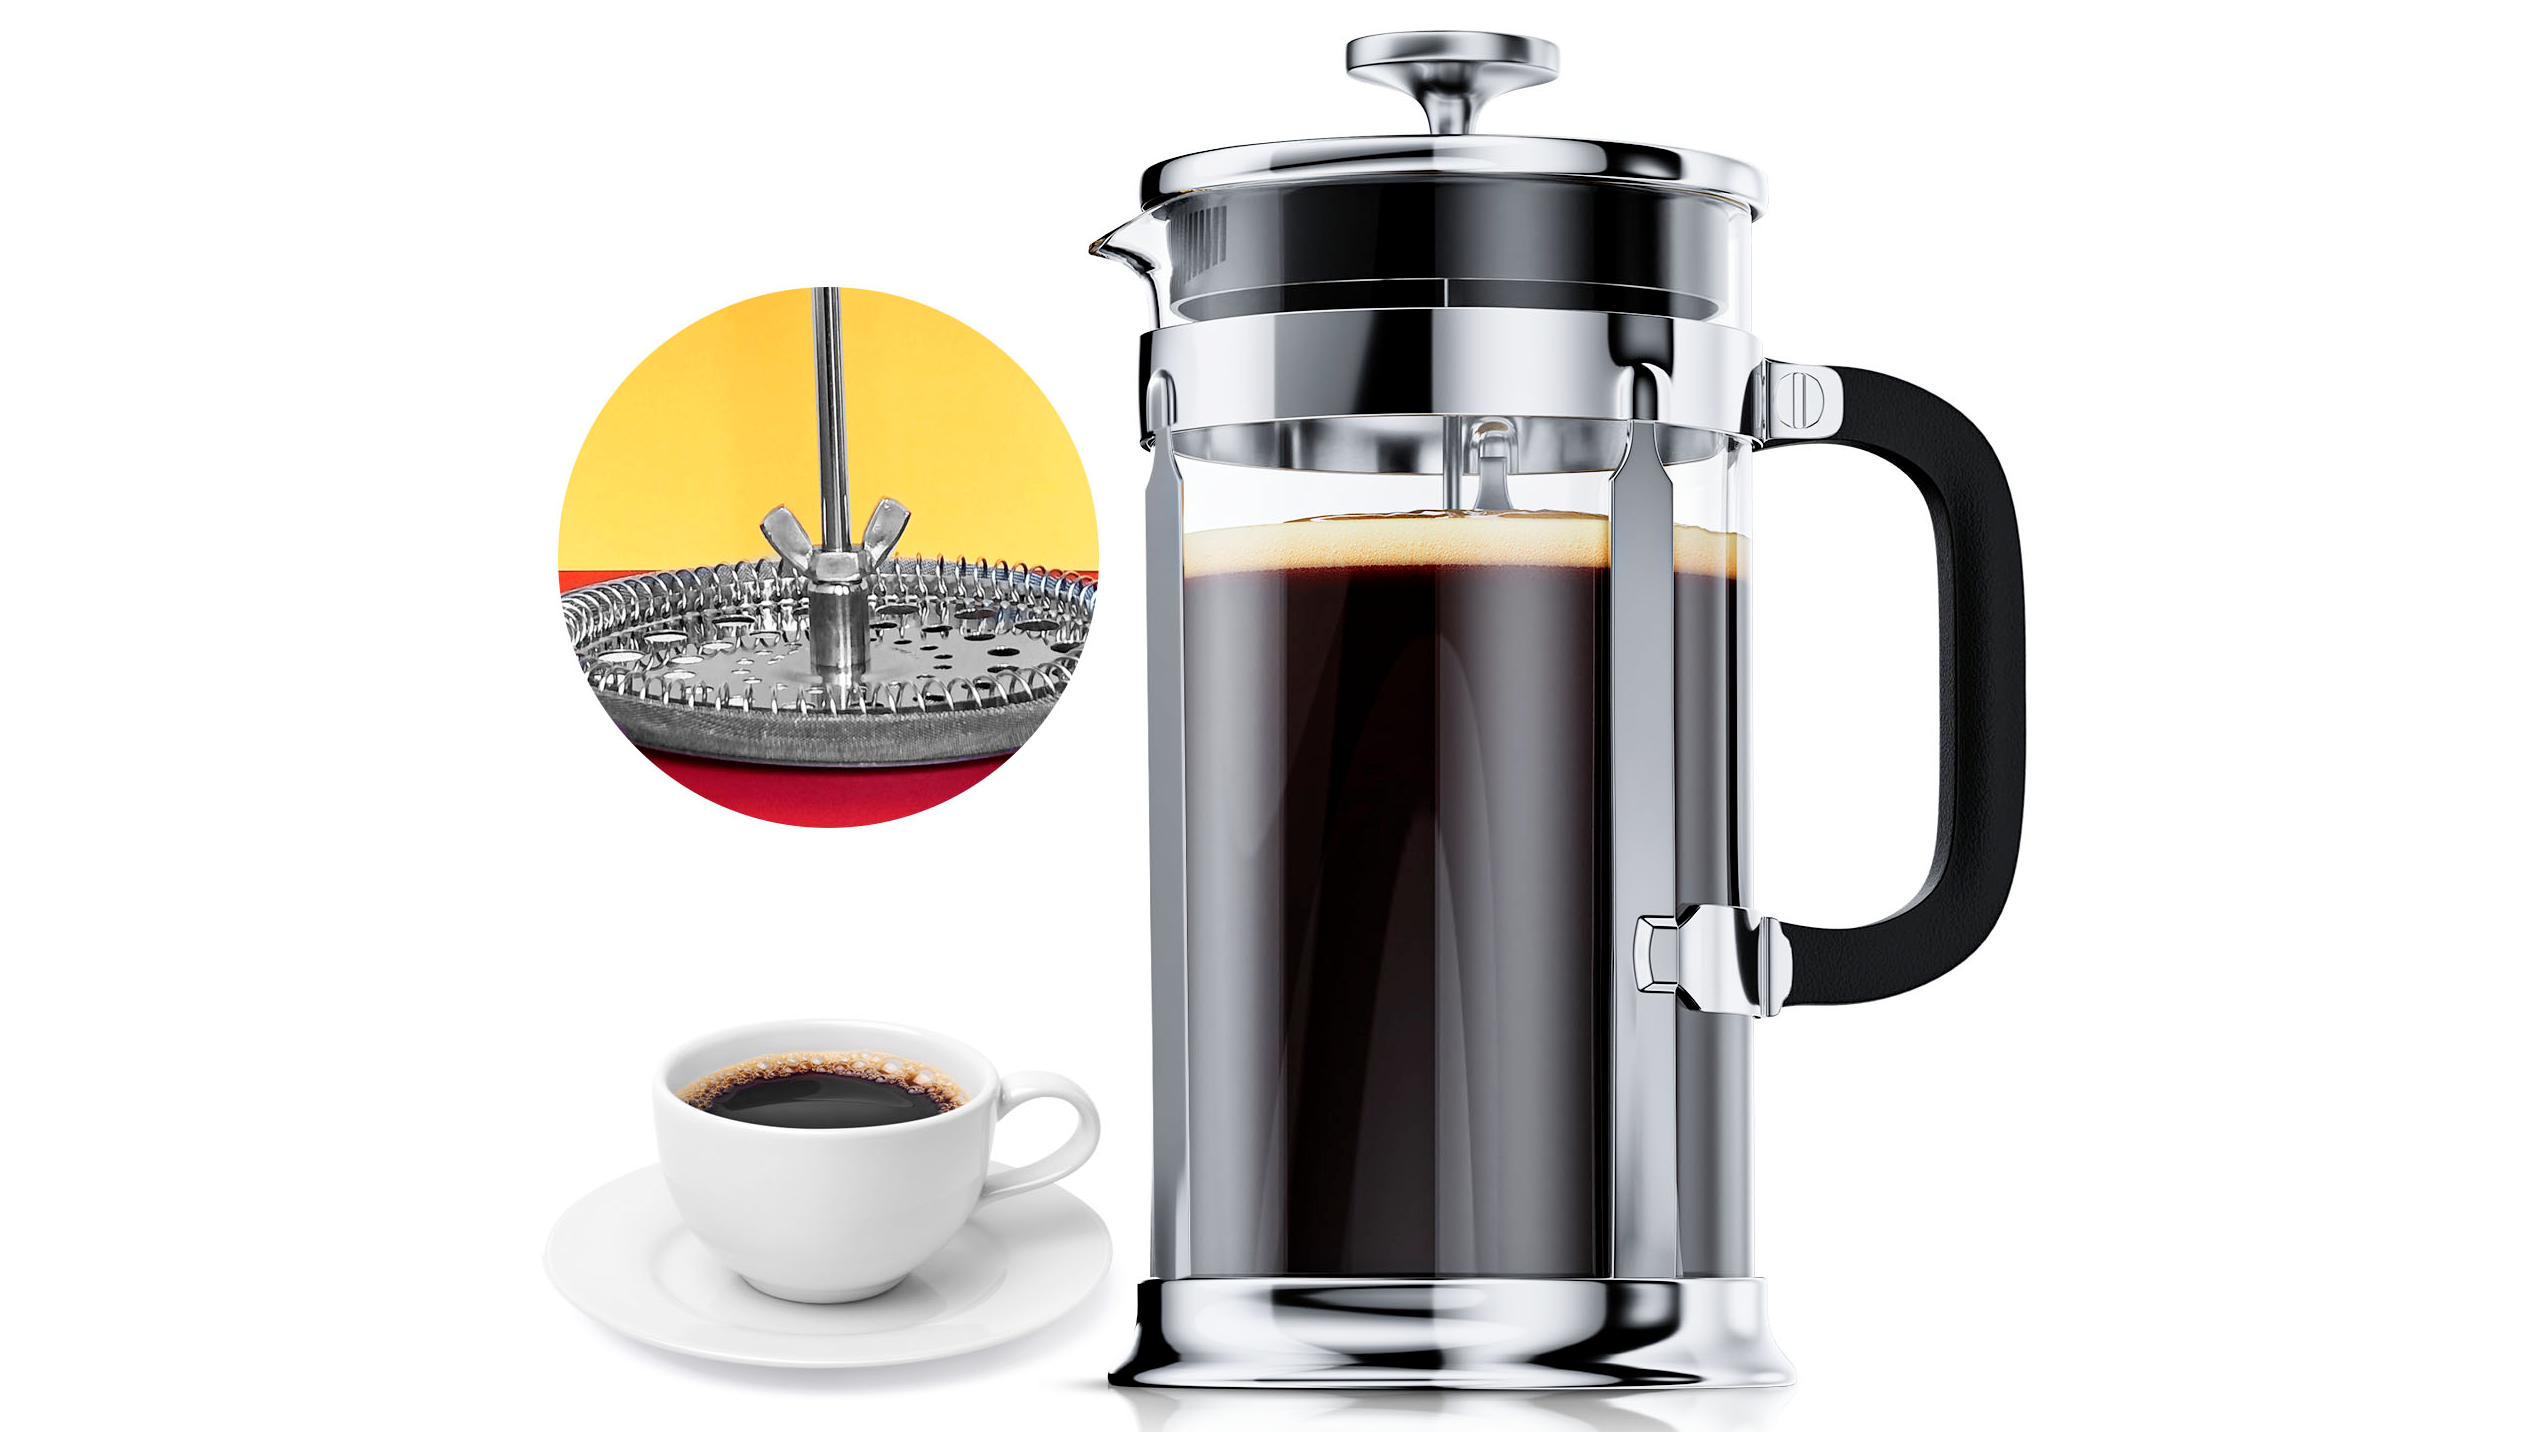 Best Gift For Coffee Lovers: French Press Cafetiere With A Dual Filter System